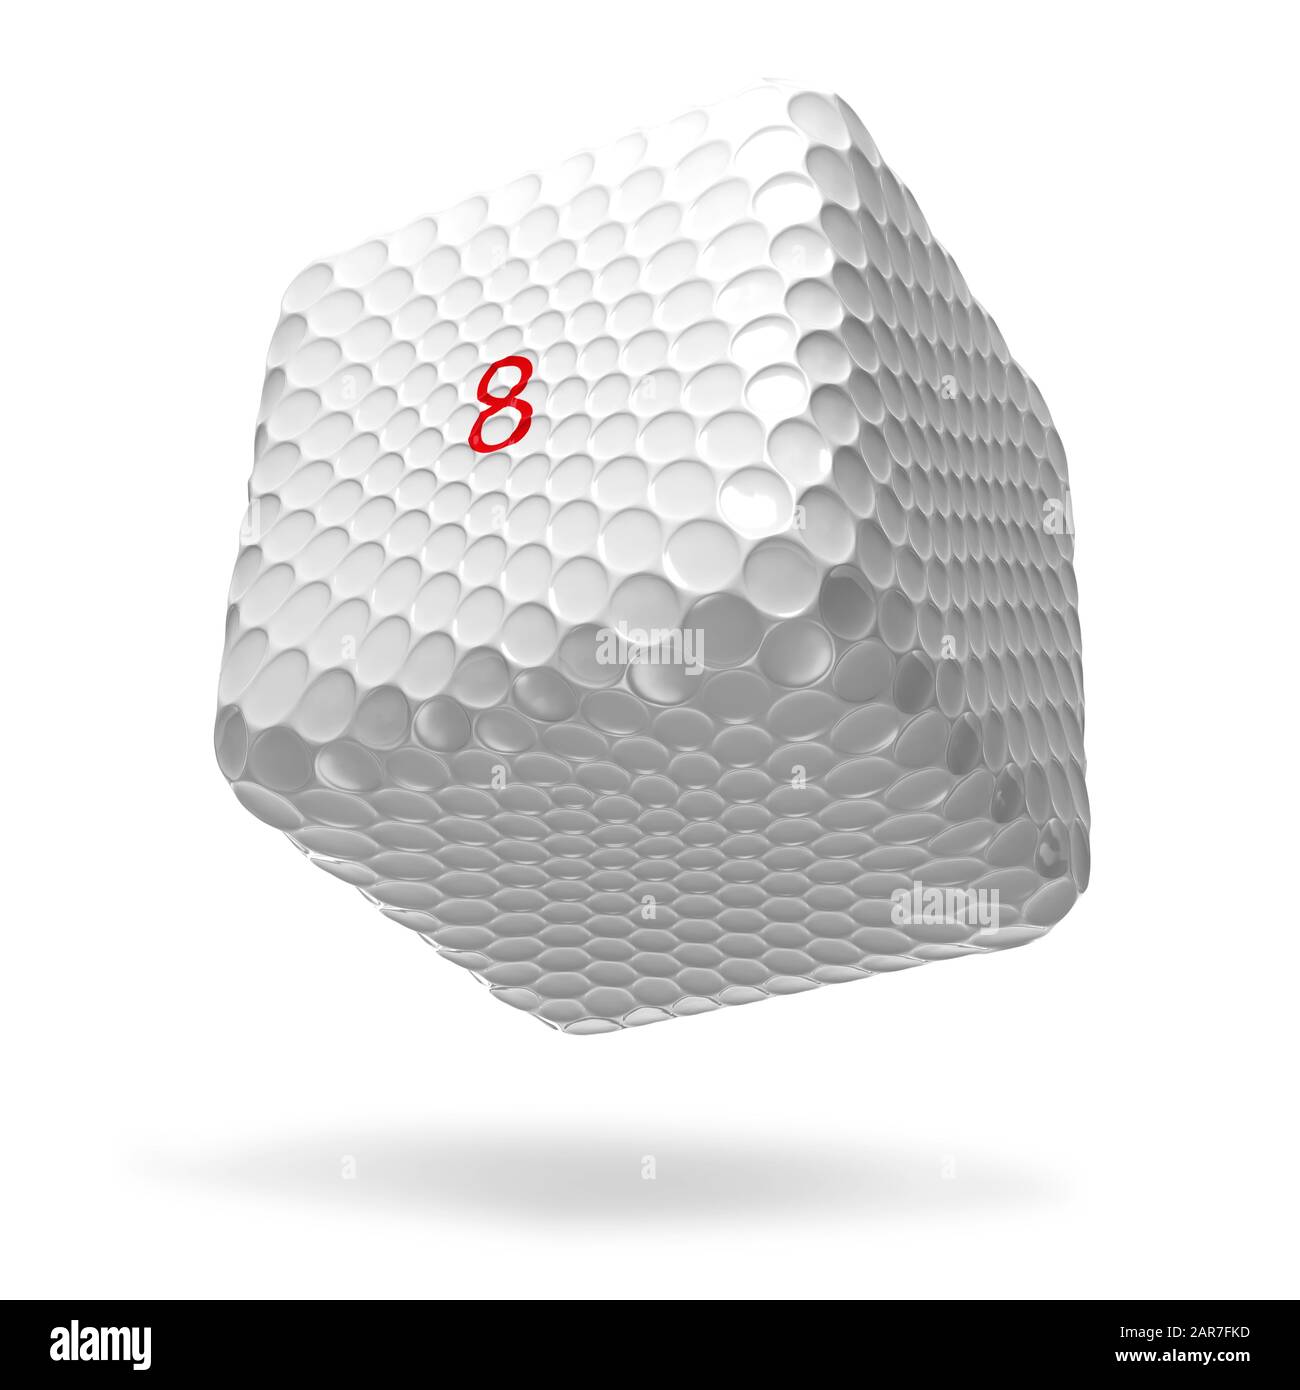 Square Golf Ball bouncing on a white background Stock Photo